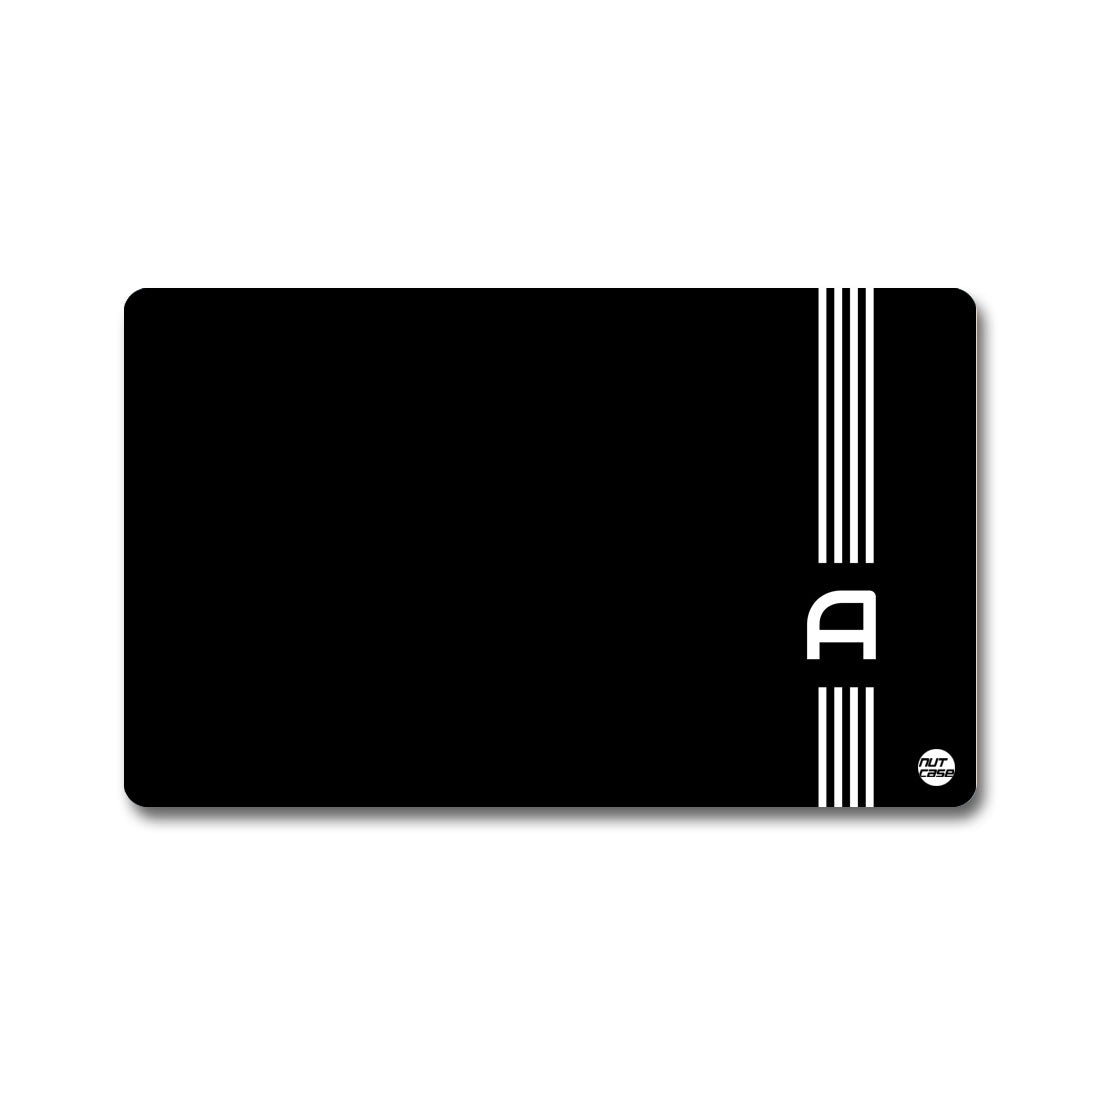 Metal Customized Best NFC Business Cards - Black ( For Android Phones Only)